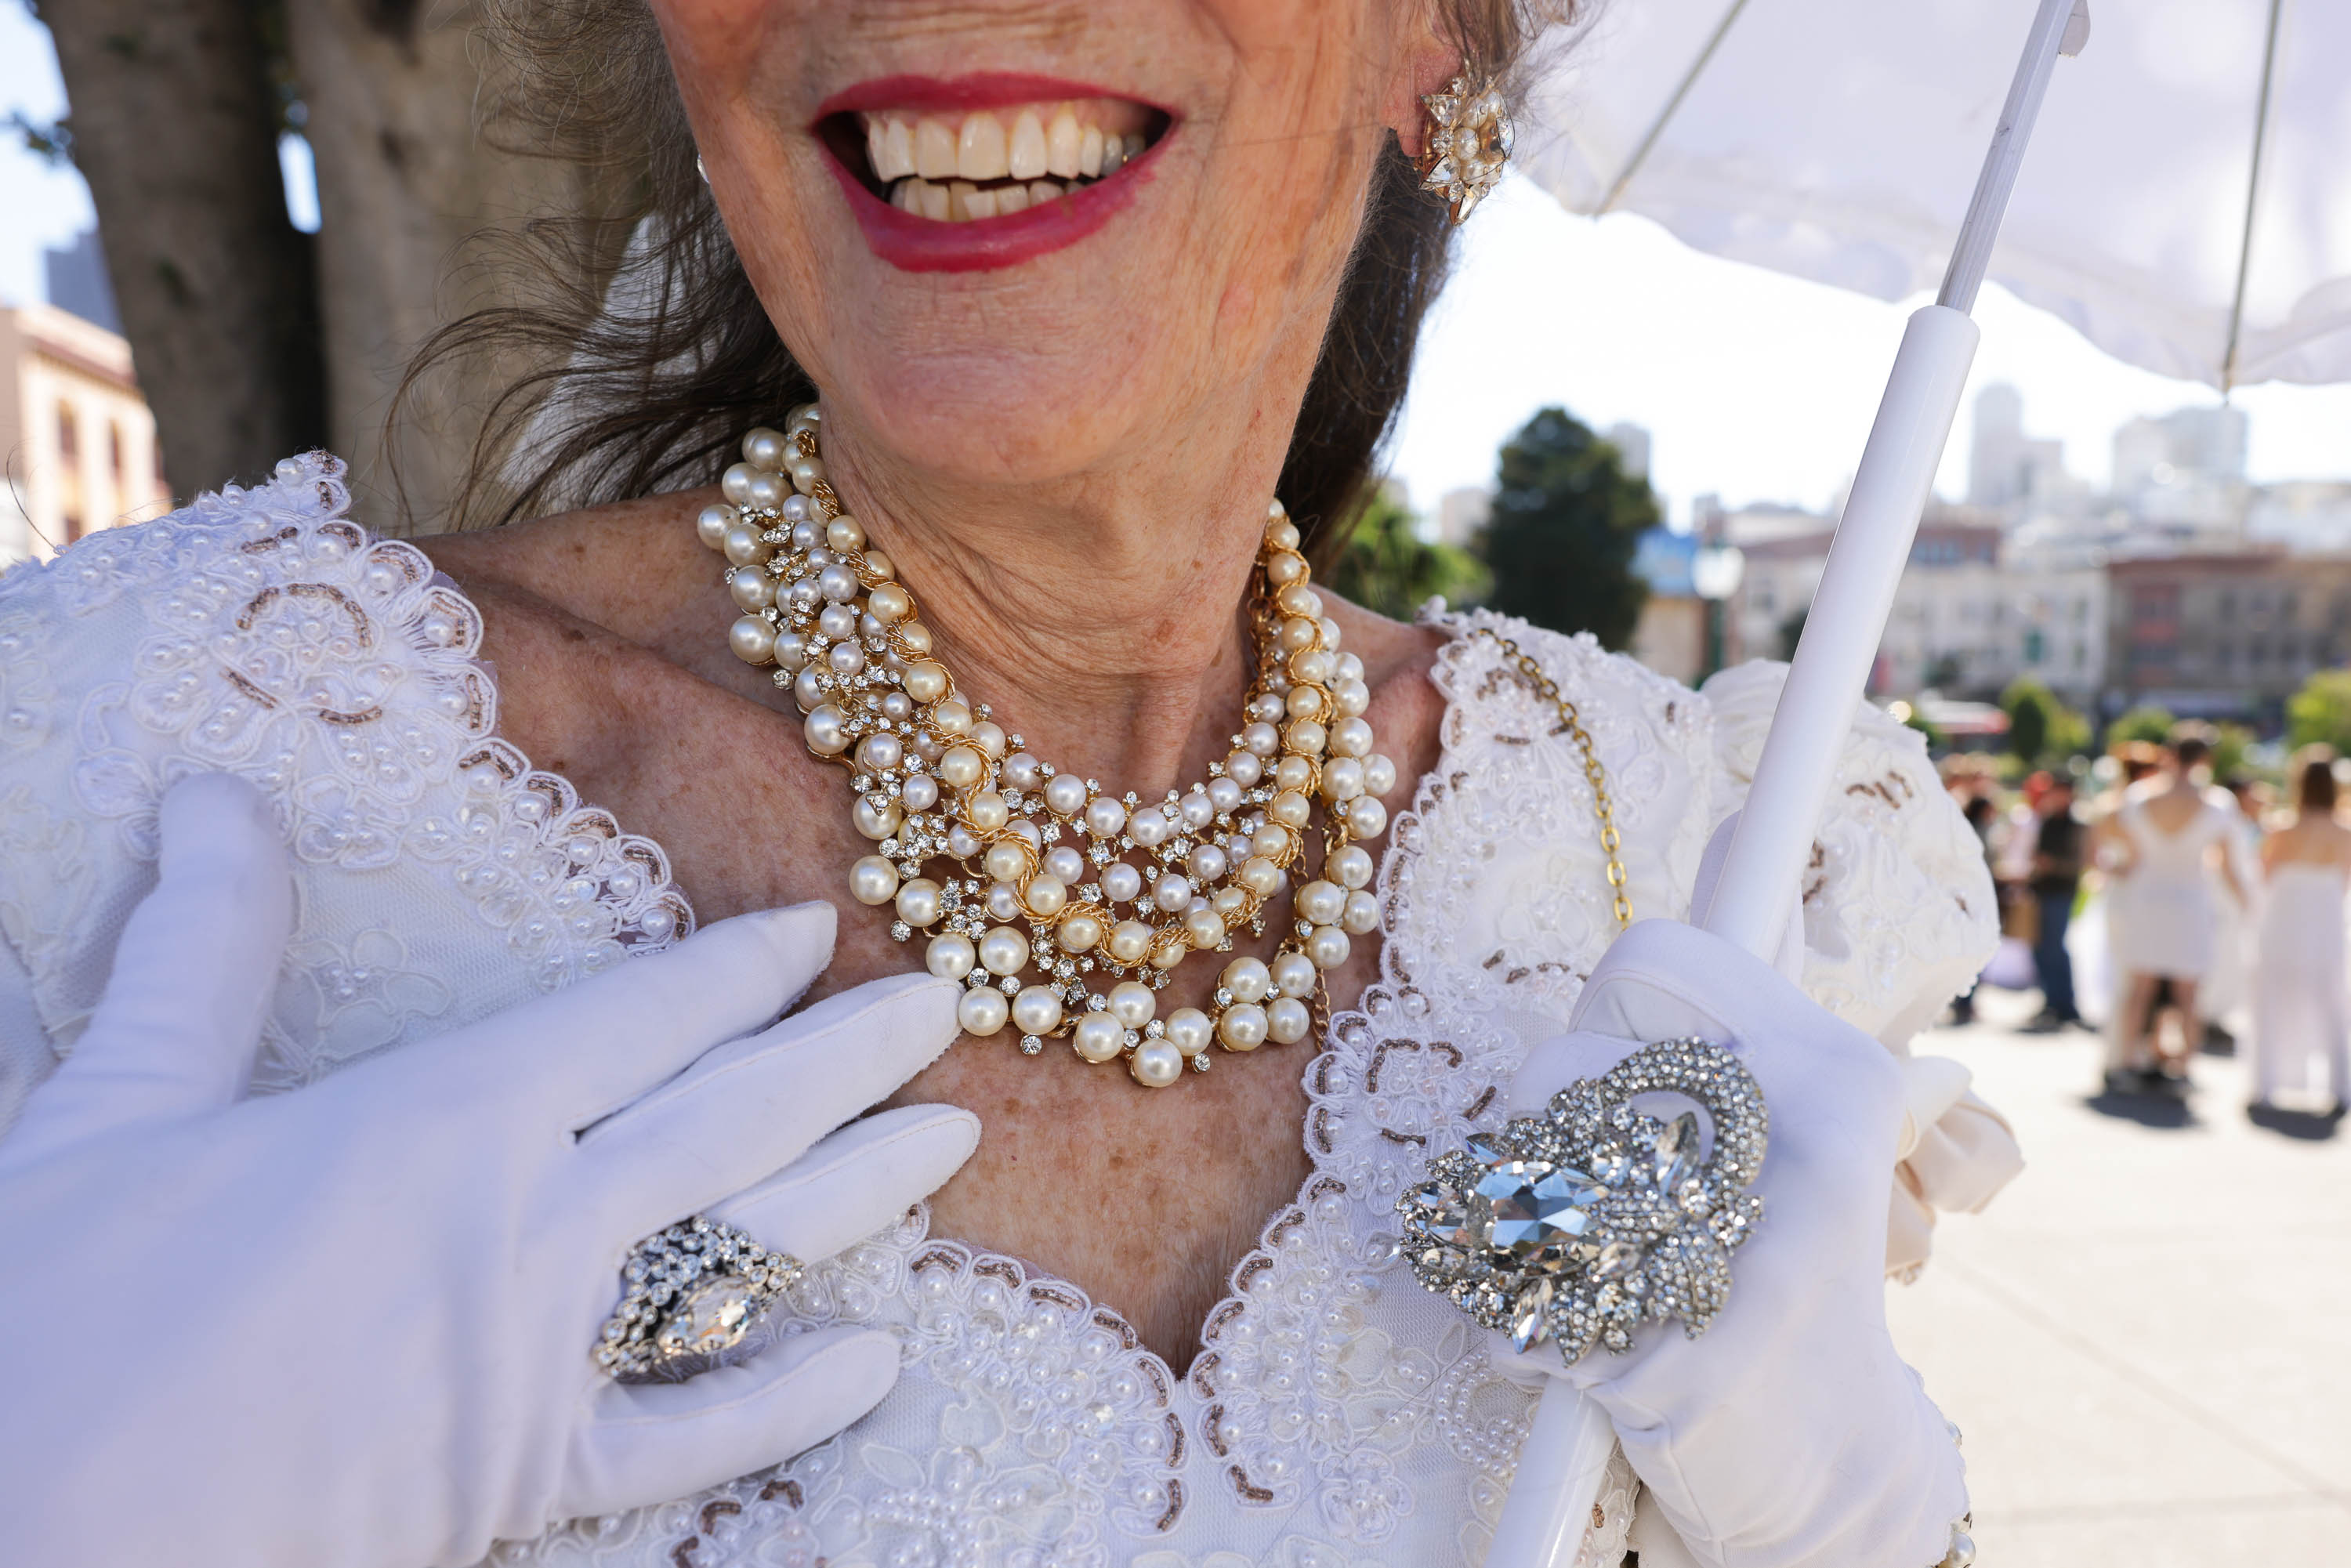 An elegantly dressed older woman smiles, displays a pearl necklace, wears white gloves, and holds a parasol.